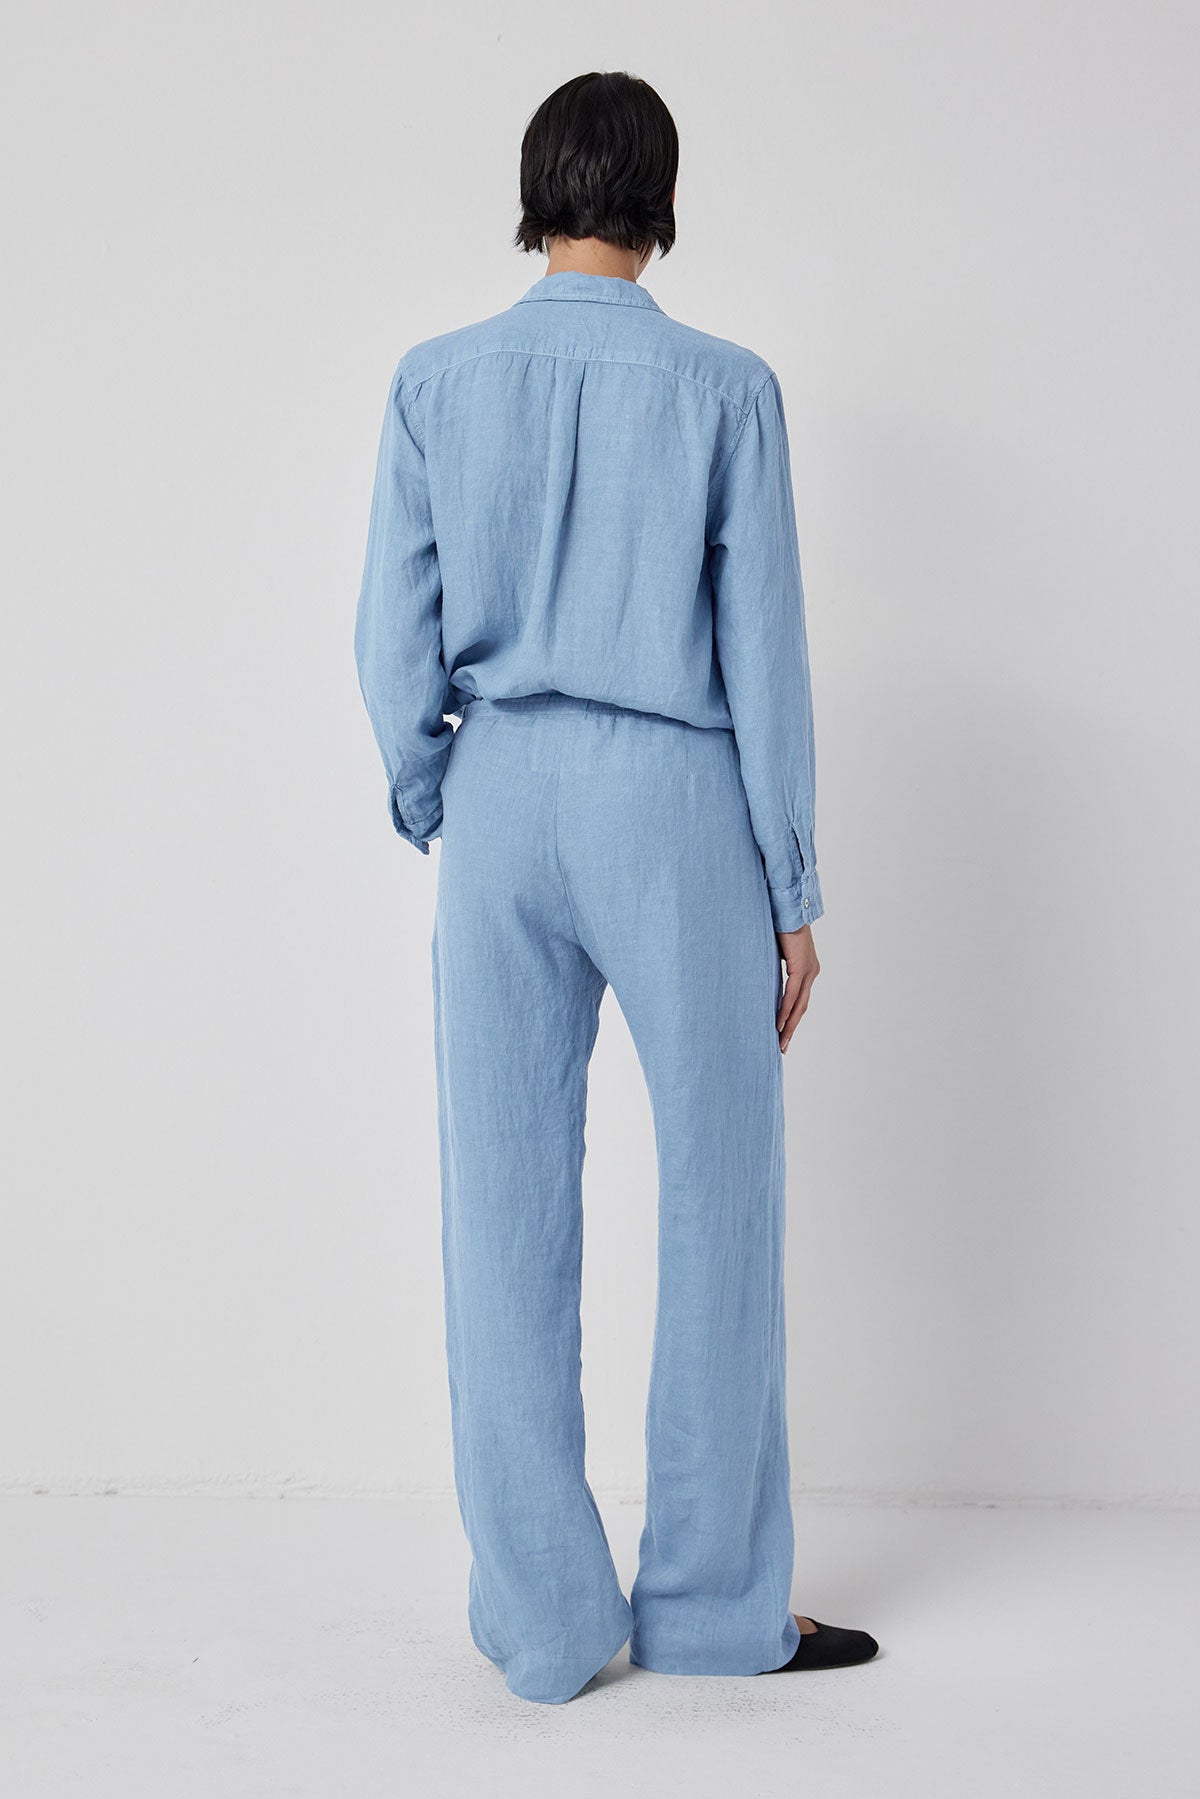 A person standing with their back to the camera, wearing a light blue denim jumpsuit with relaxed fit and black flats, against a white background.-36212497940673